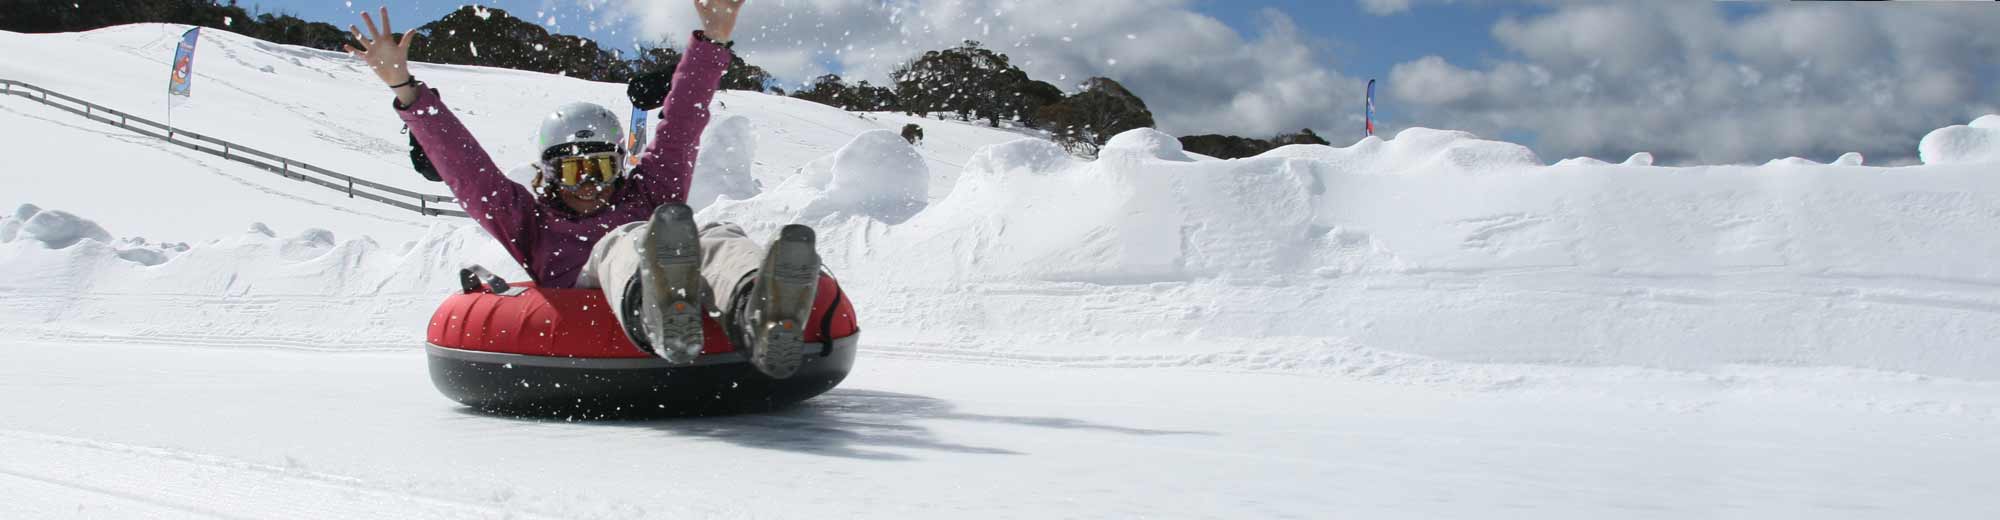 things to do in the snowy mountains